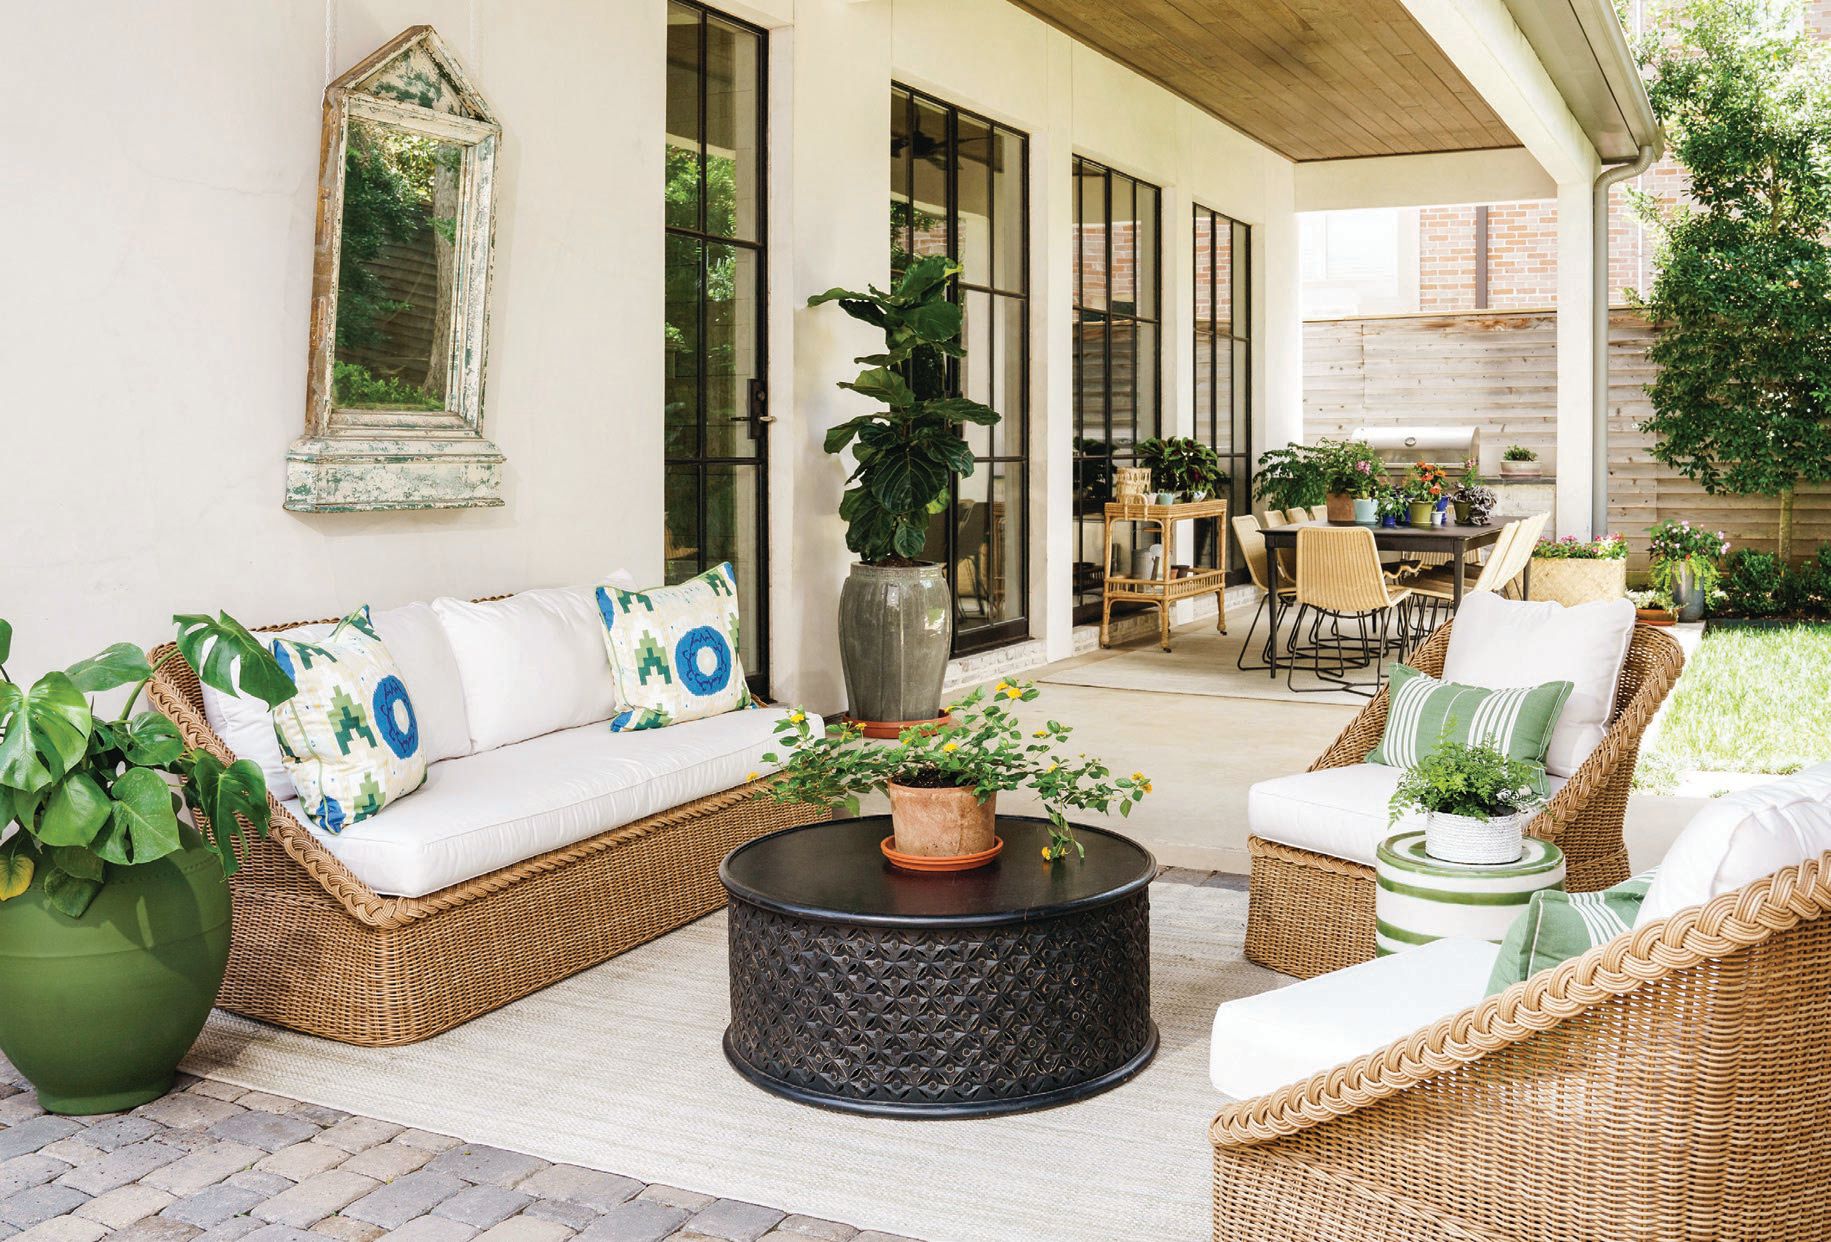 The outdoor space feels like a secret garden. PHOTOGRAPHED BY JACK THOMPSON